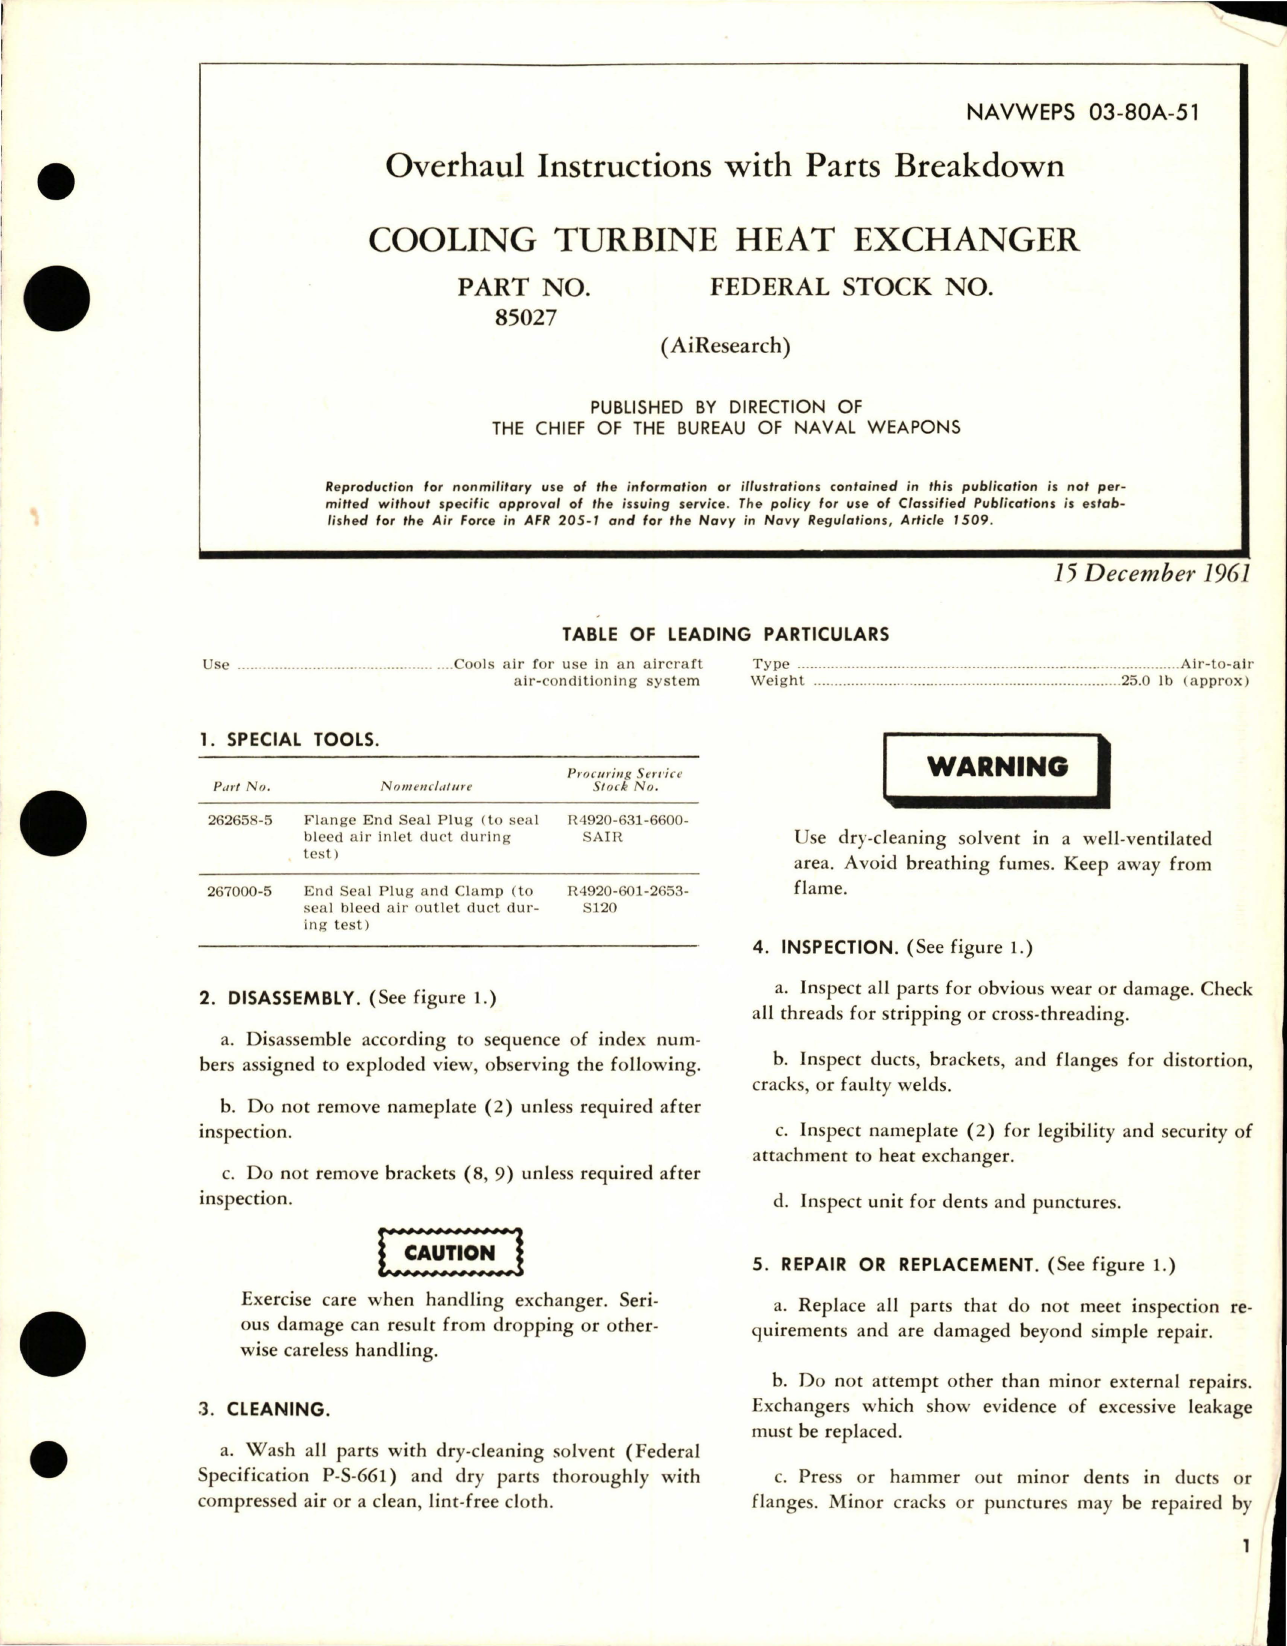 Sample page 1 from AirCorps Library document: Overhaul Instructions with Parts Breakdown for Cooling Turbine Heat Exchanger - Part 85027 